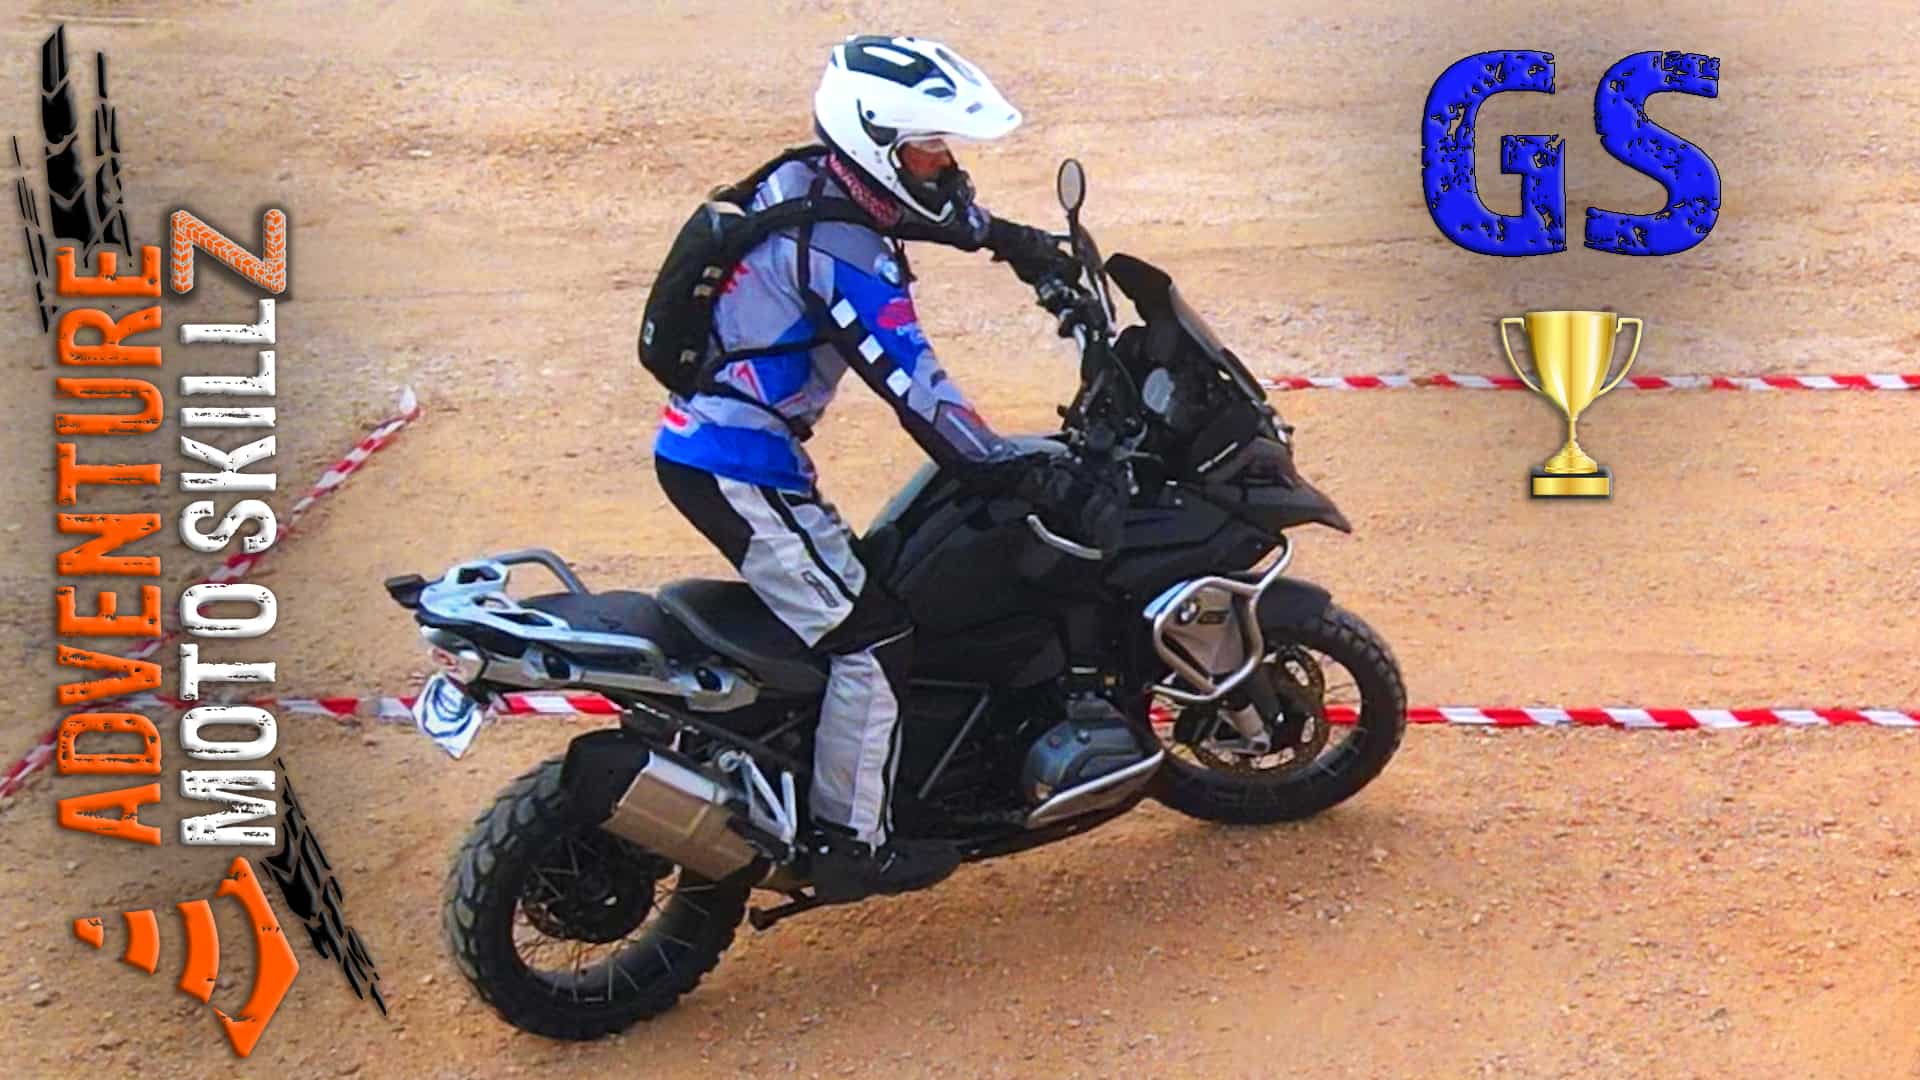 GS Trophy Training for motorcycle